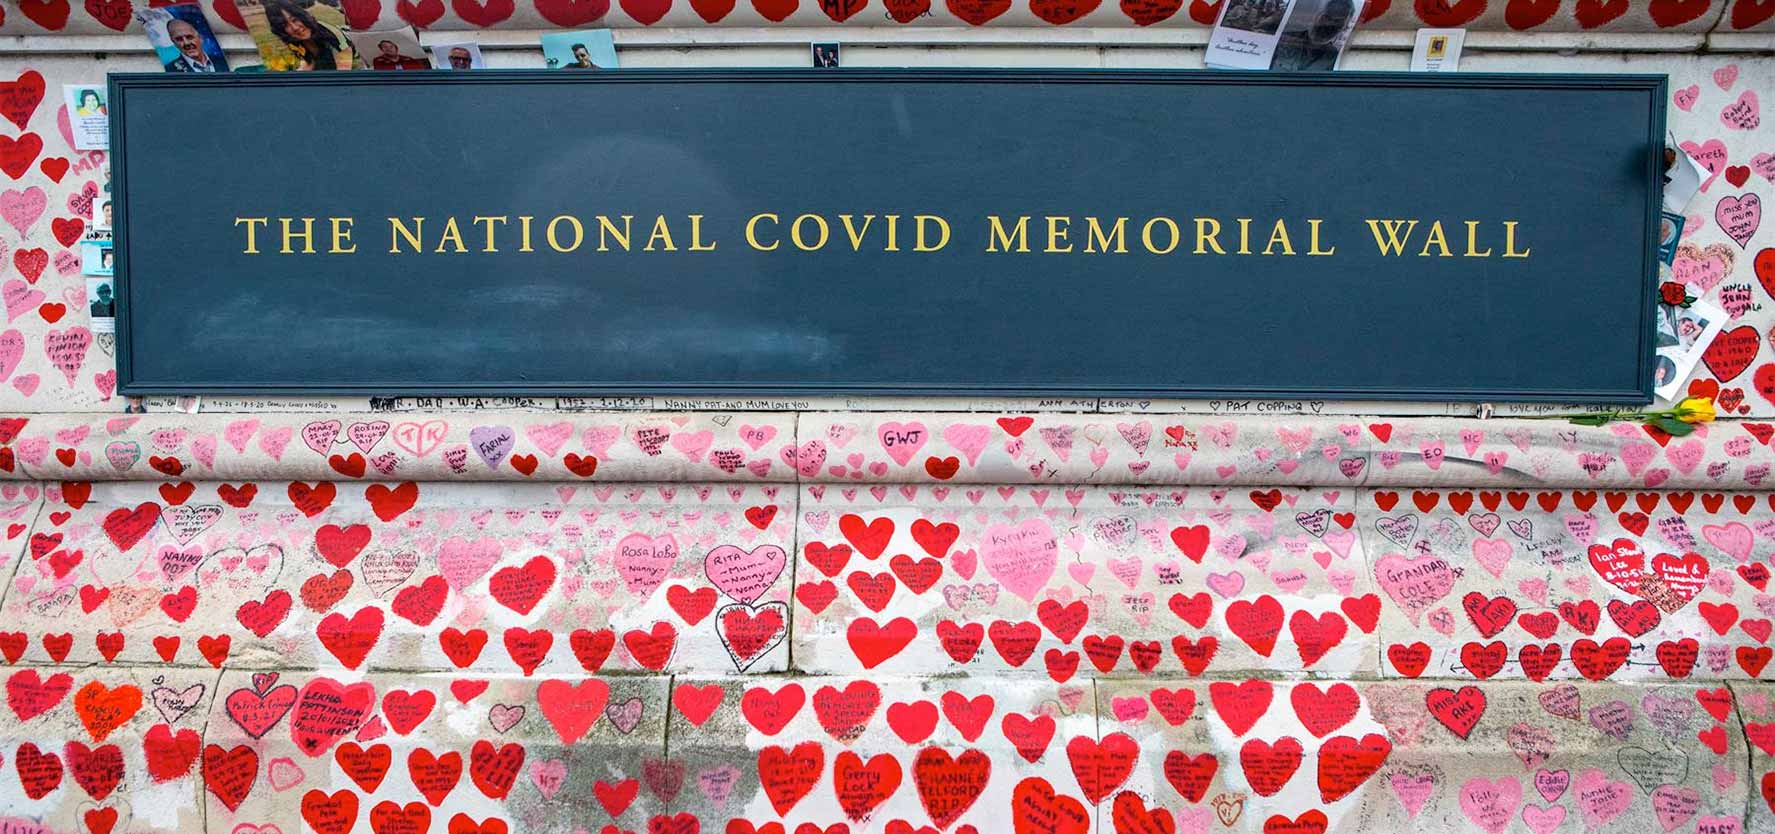 An image showing hand drawn hearts on the National Covid Memorial Wall. Picture: chrisdorney - stock.adobe.com